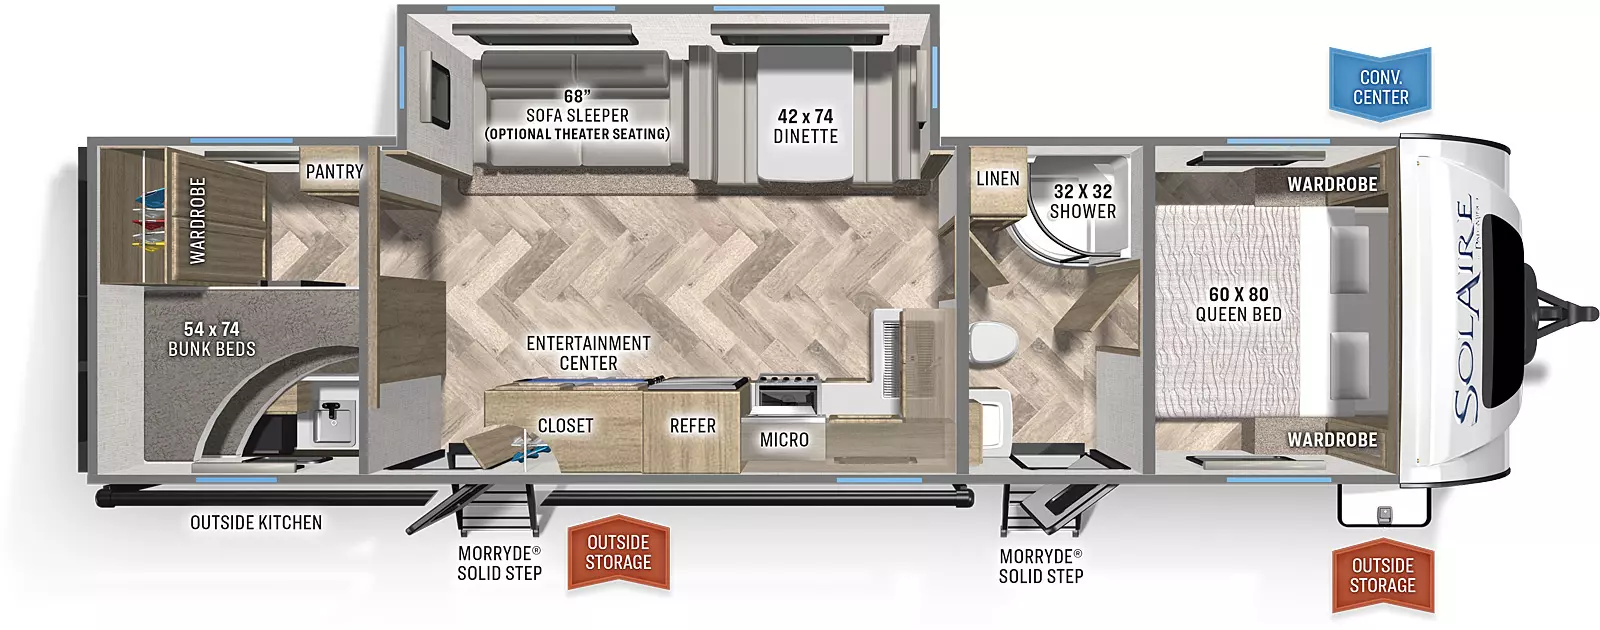 The SolAire Ultra Lite 315DQBH includes 2 entry doors on the campside, 1 slideout on road side, and an outside mini kitchen; inside are  54 x 74 bunk beds, a wardrobe and pantry; the dining area includes a 68" sofa sleep and a 42 x 74 dinette; the bathroom includes a linen closet, a  32 x 32 shower, a sink and toilet, a door leads to the bedroom; included in the bedroom are 2 wardrobes on either side of a 60 x 80 queen bed; the kitchen includes a sink with overhead storage, a stove and cooktop with a microwave overhead, a refrigerator, an entertainment center, and a closet. 